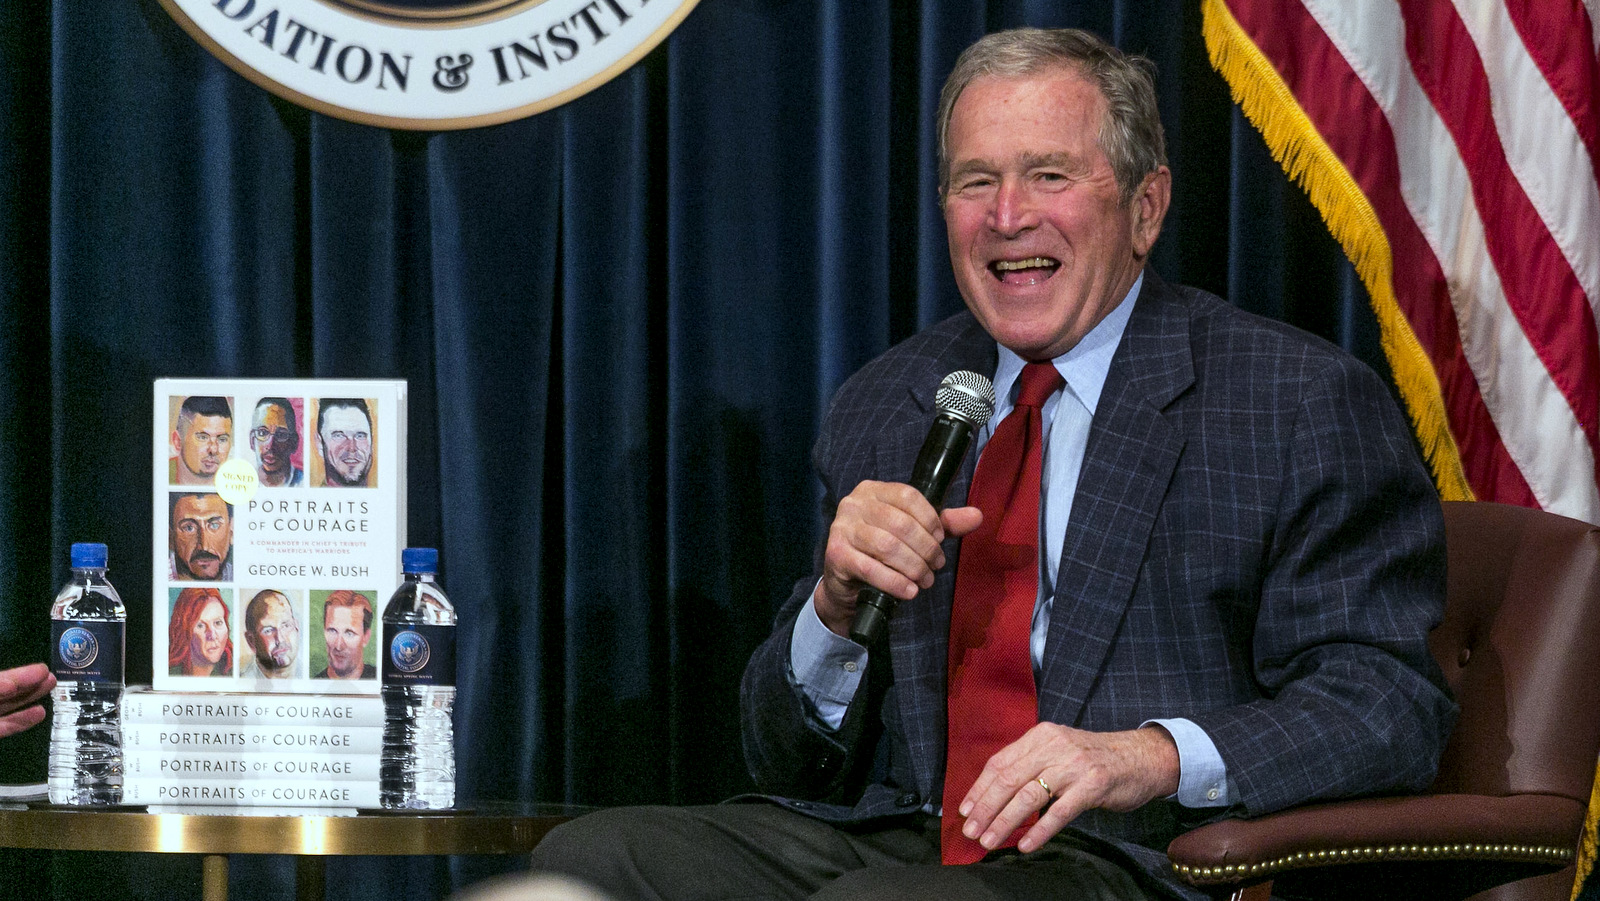 Former U.S. President George W. Bush discusses his new book at the Ronald Reagan Presidential Library in Simi Valley, Calif., Wednesday, March 1, 2017. (AP/Damian Dovarganes)